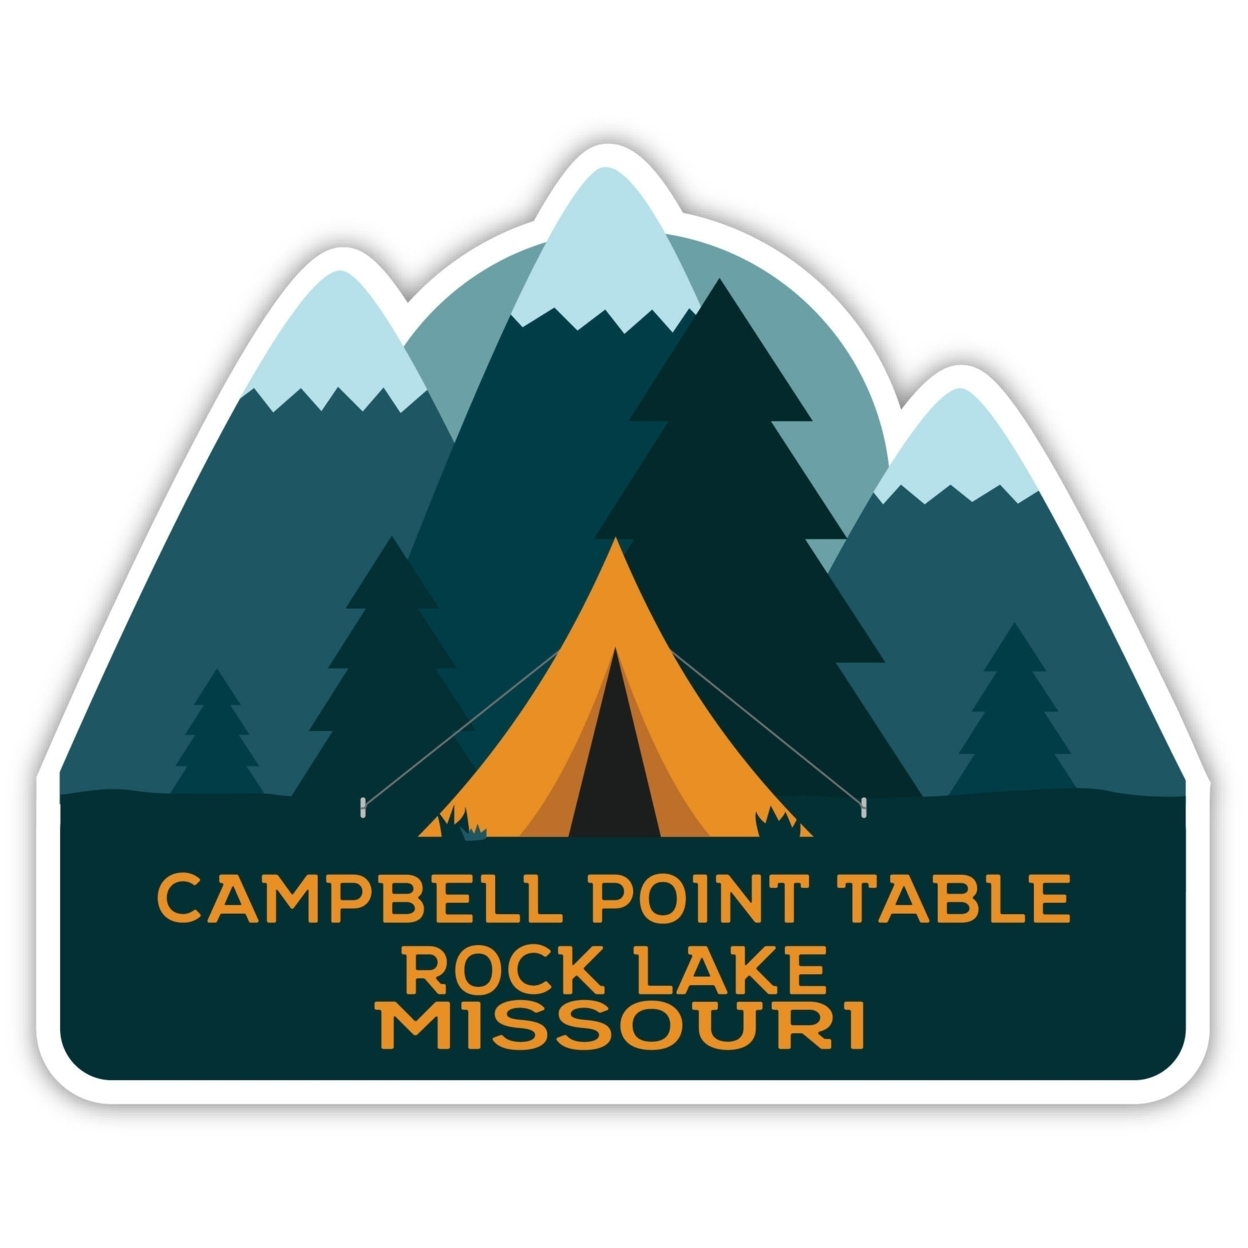 Campbell Point Table Rock Lake Missouri Souvenir Decorative Stickers (Choose Theme And Size) - 4-Pack, 4-Inch, Tent